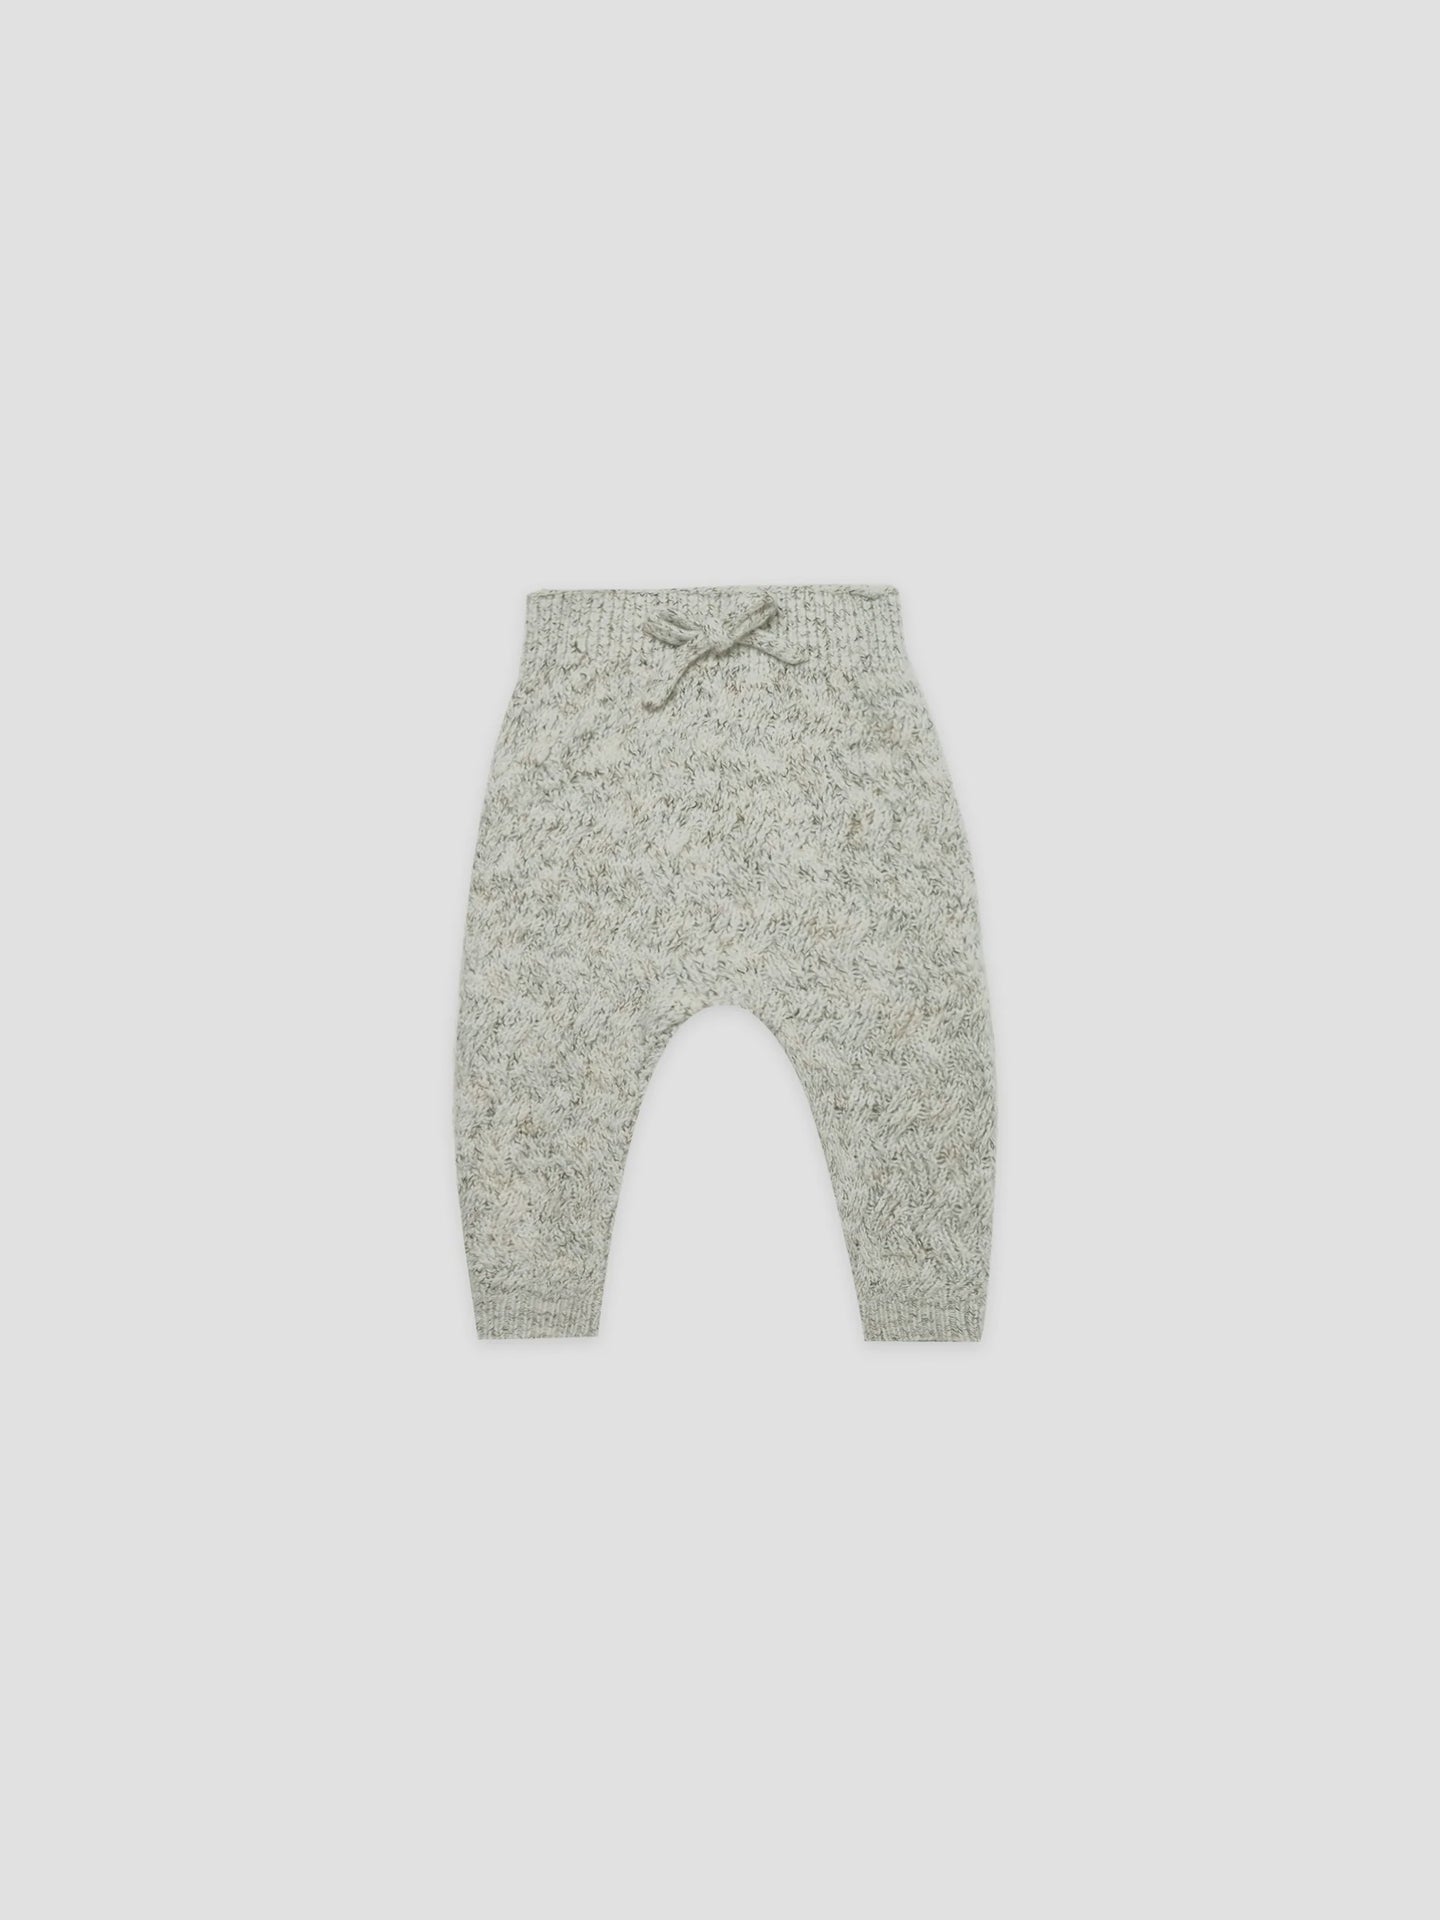 Quincy Mae - Cozy Heathered Knit Pant - Fern